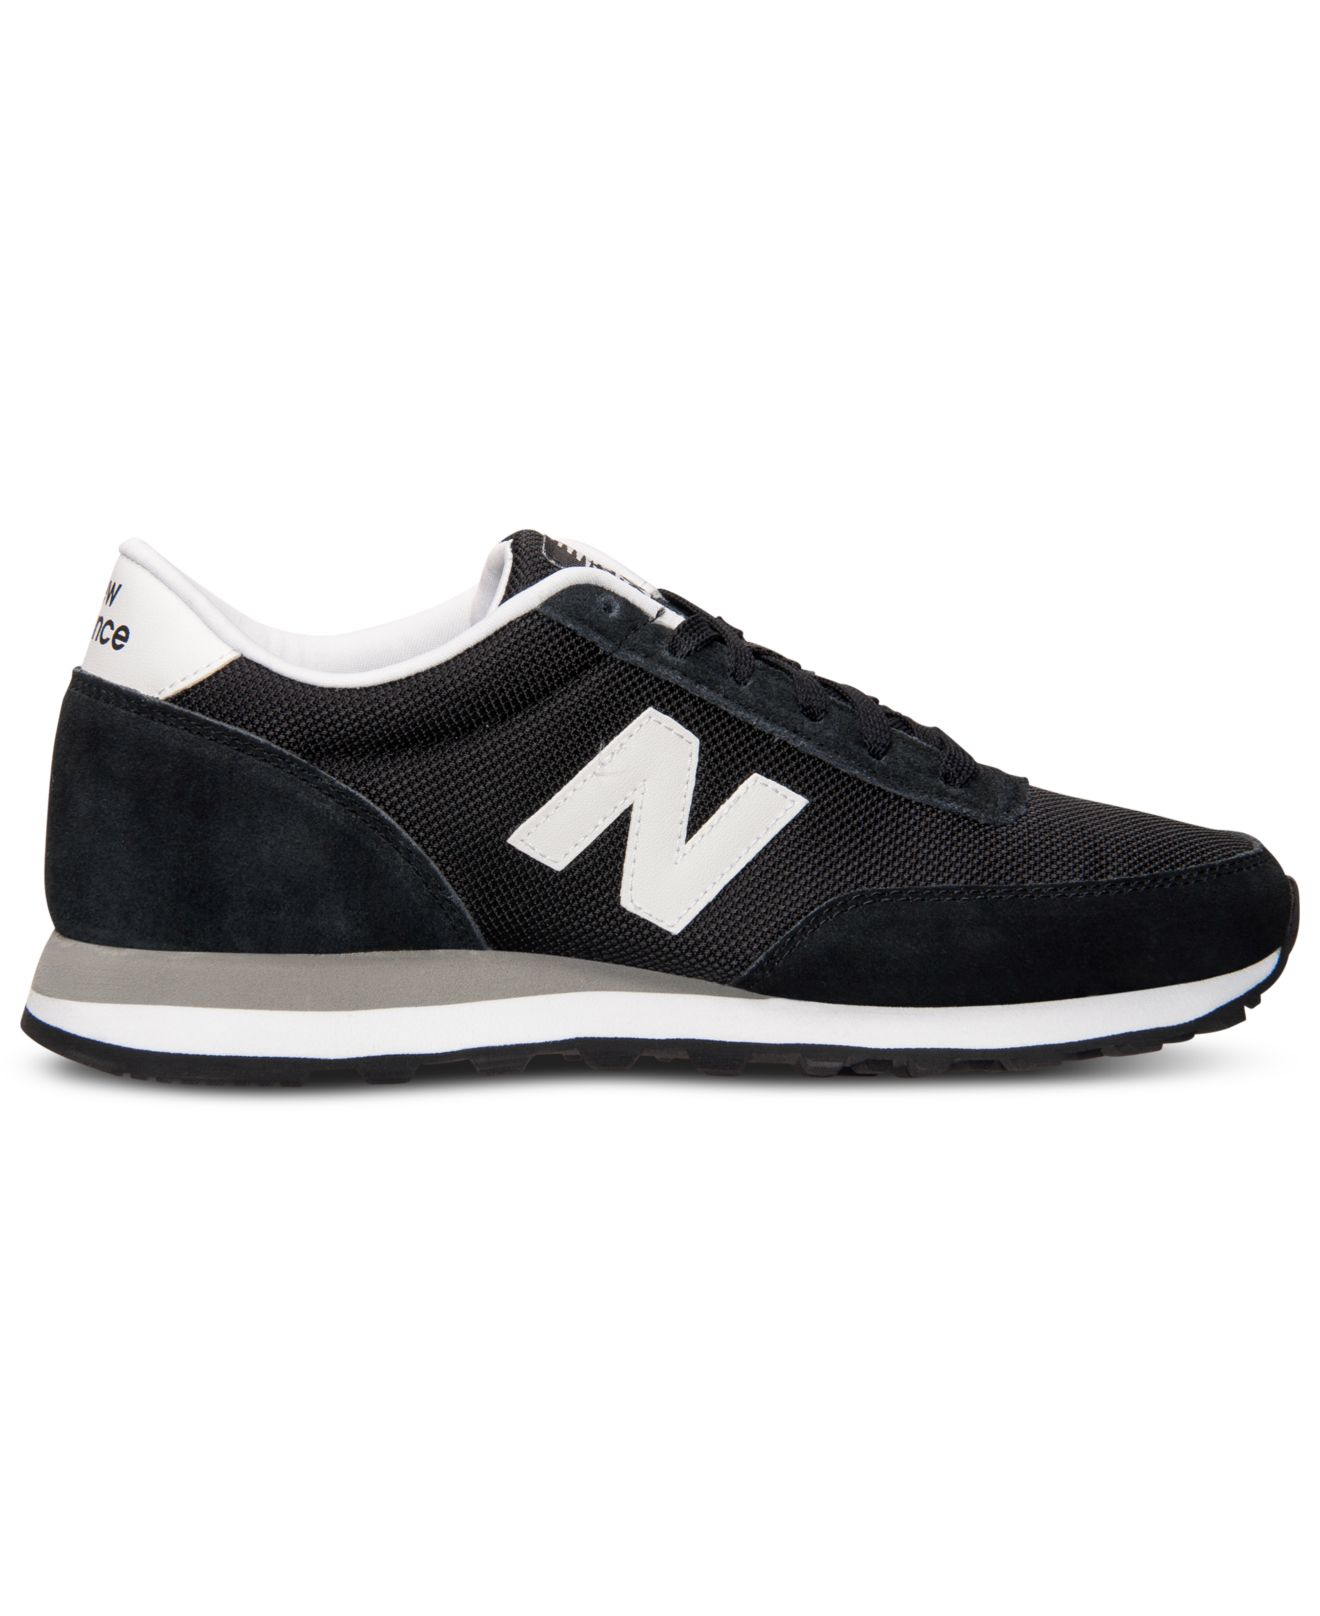 Lyst - New Balance Men's 501 Casual Sneakers From Finish Line in Black ...